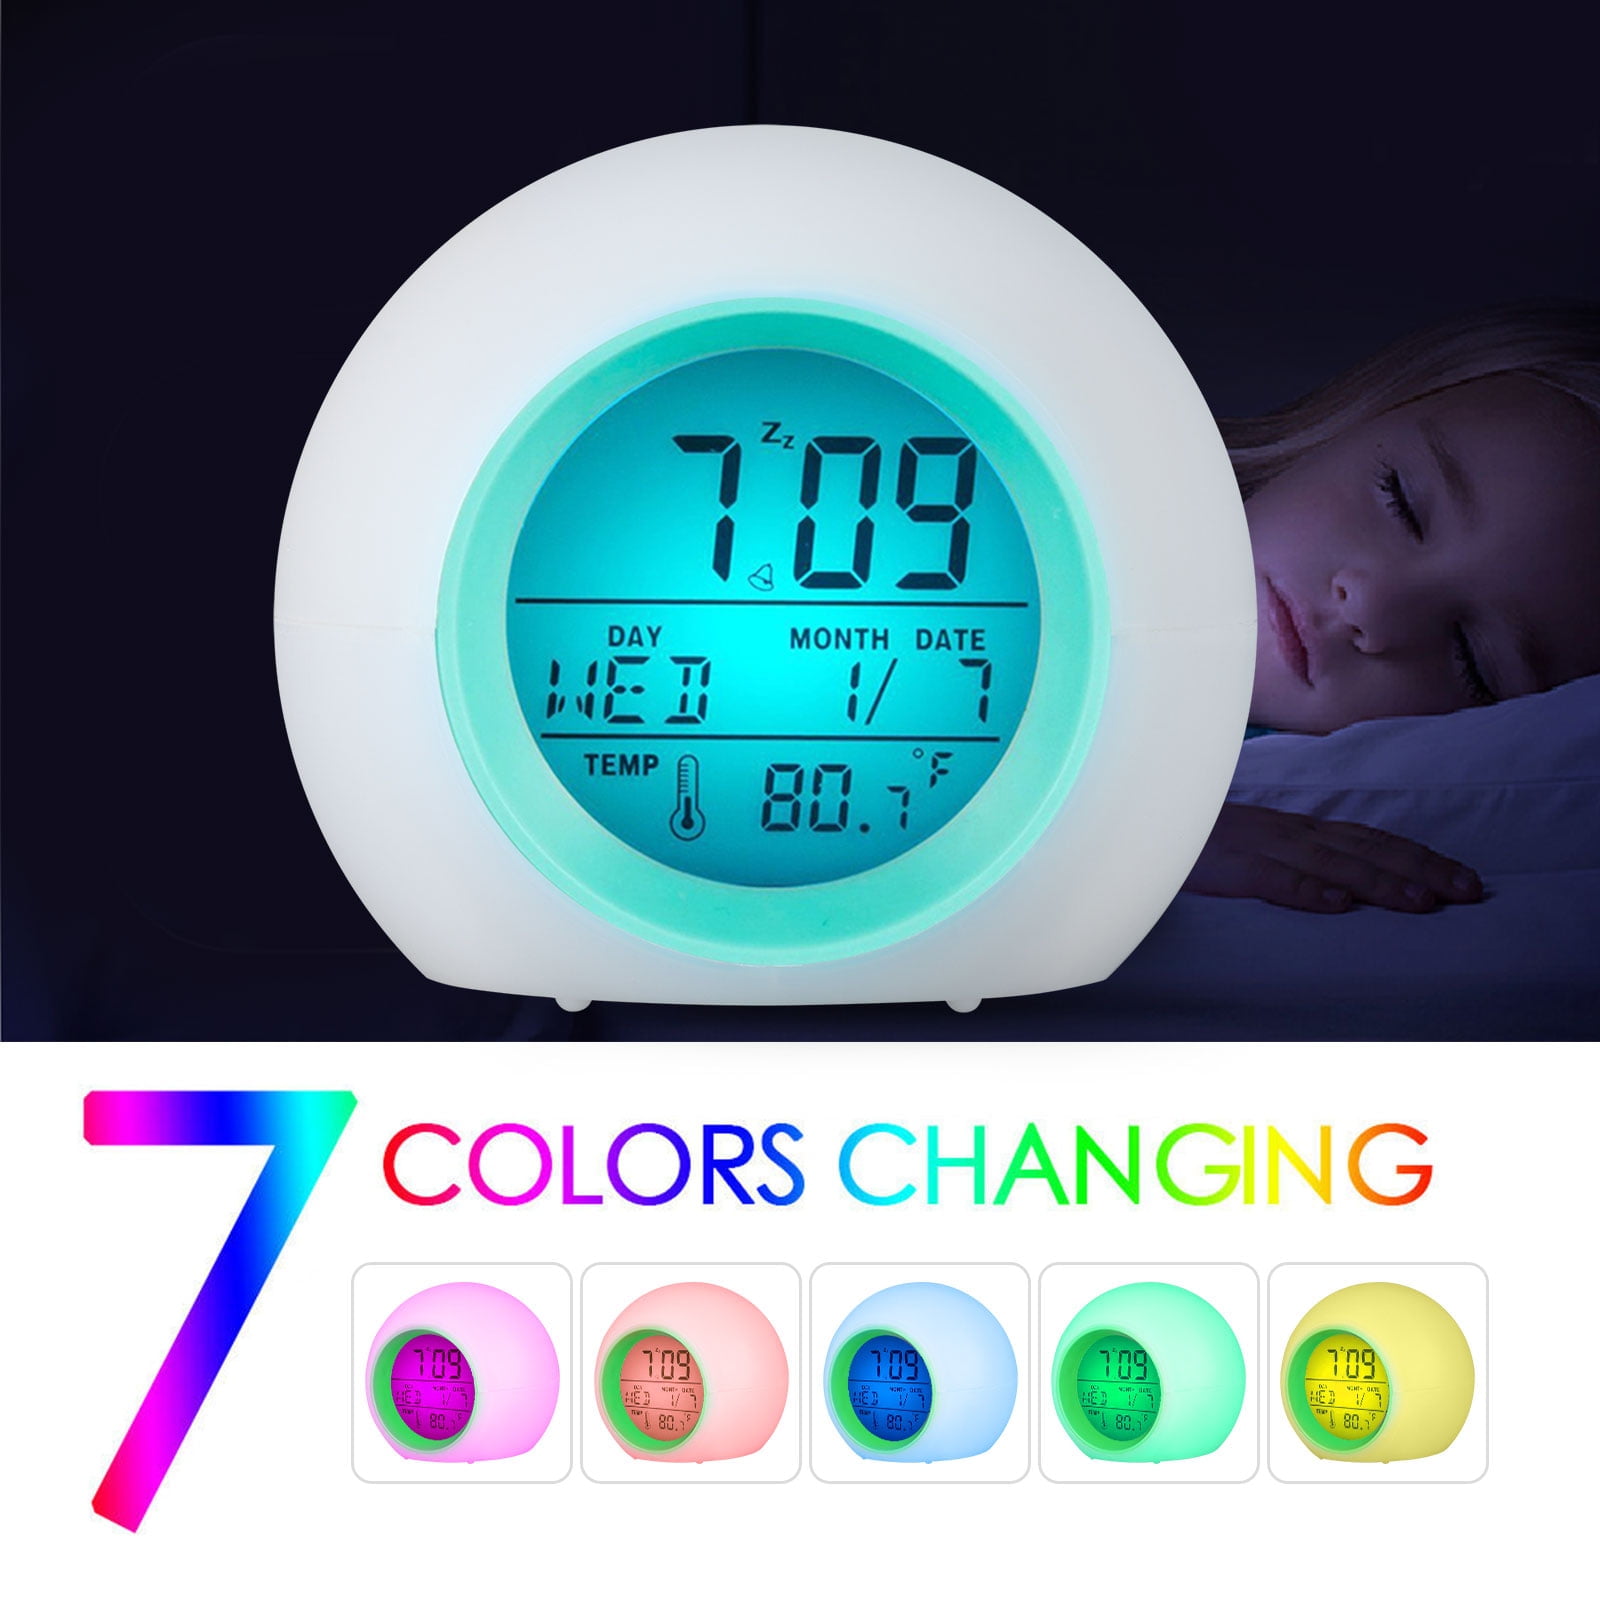 Touch Control and Snoozing Kids LED Alarm Clock Wake Up Digital Clocks for Children Bedside Clock 7 Colors Changing Light for Boys Girls Bedroom Decor with Indoor Temperature Calendar Blue 